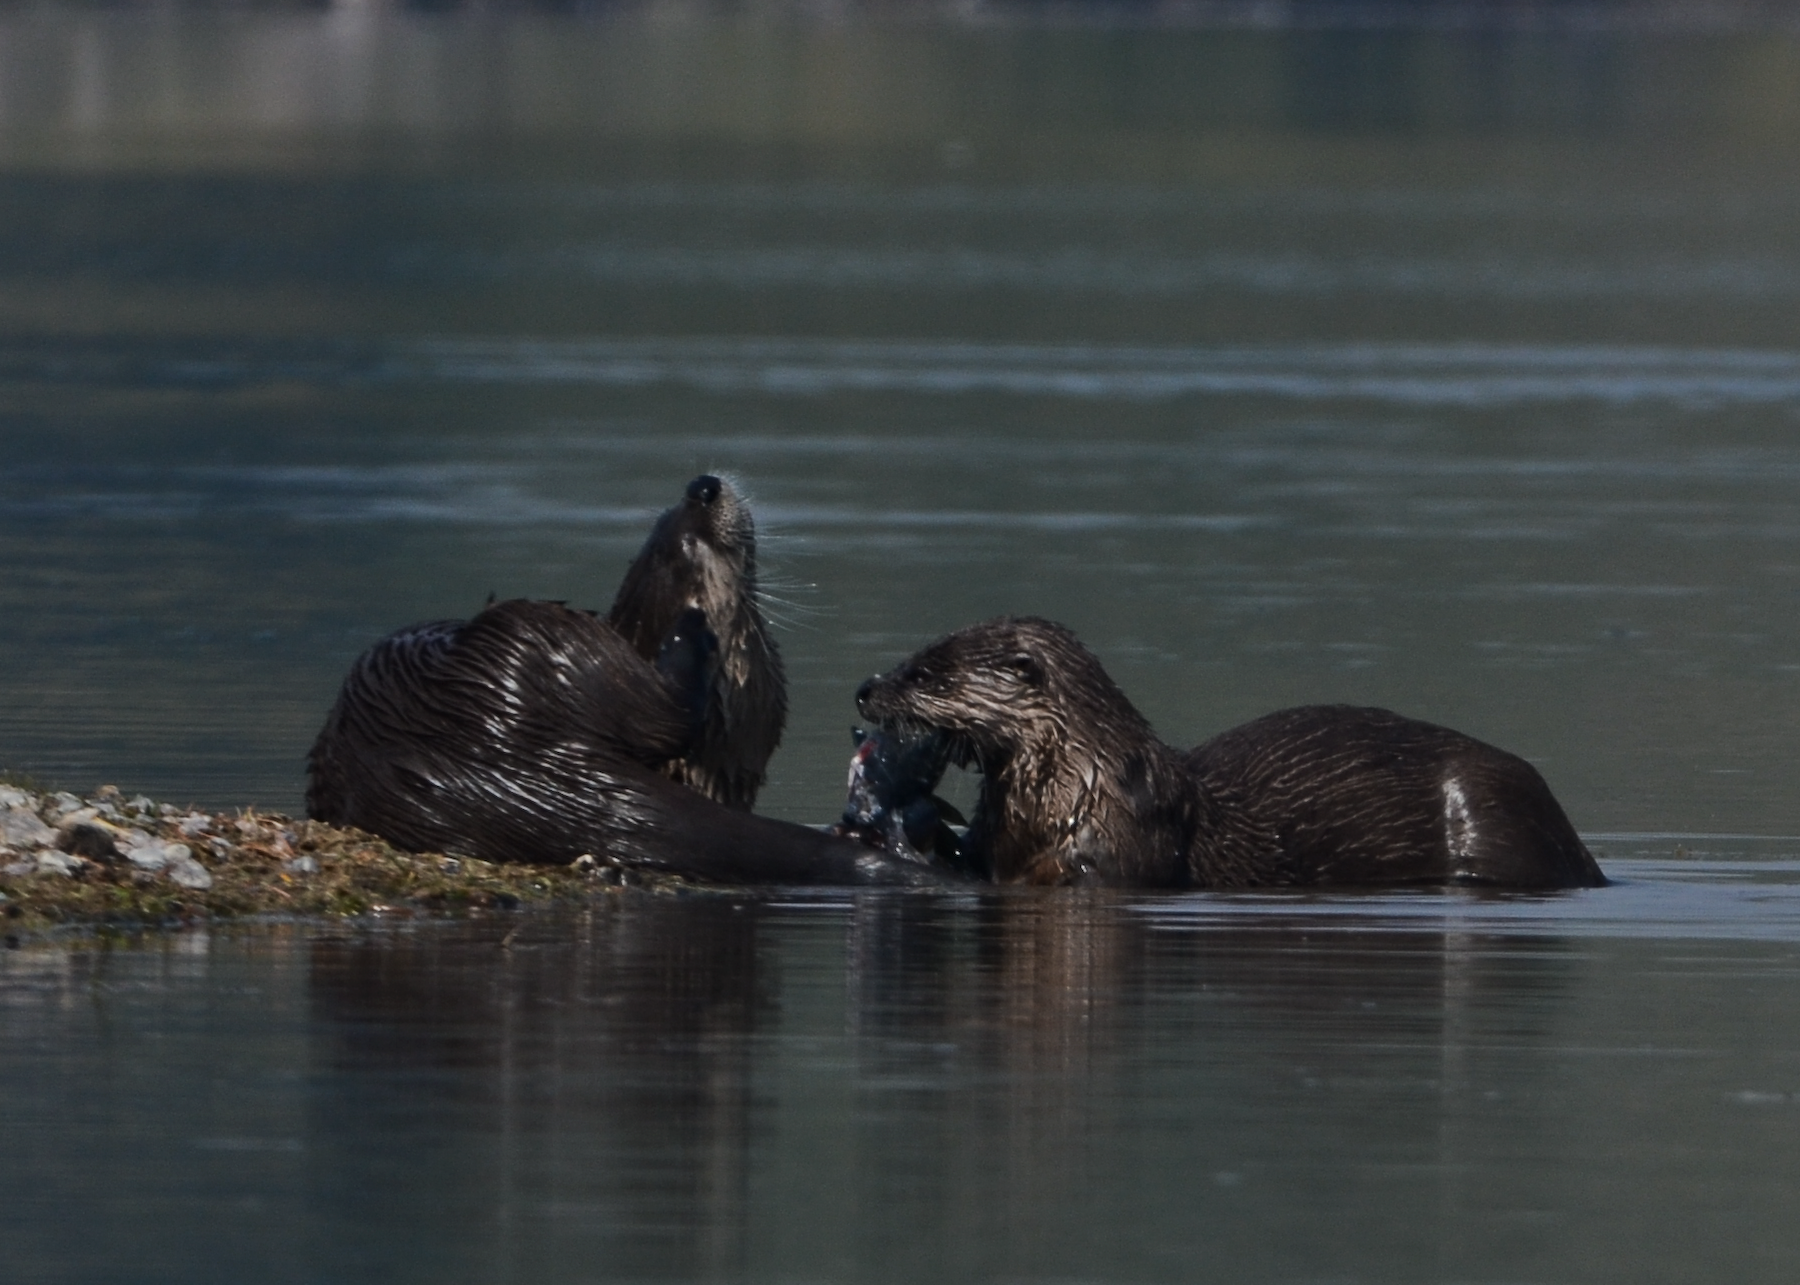 two river otters in water one eating a fish September 2012